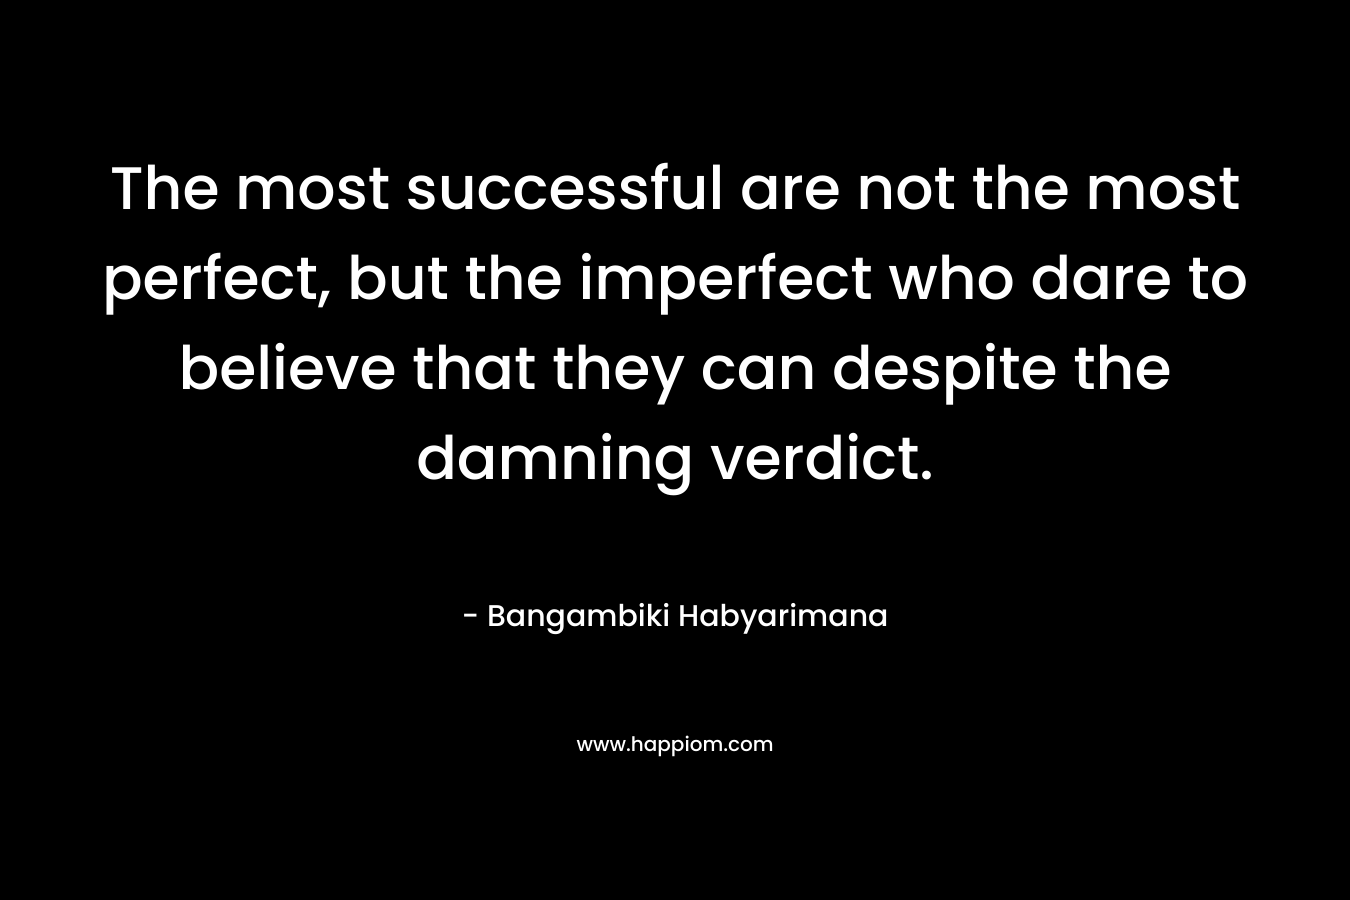 The most successful are not the most perfect, but the imperfect who dare to believe that they can despite the damning verdict. – Bangambiki Habyarimana